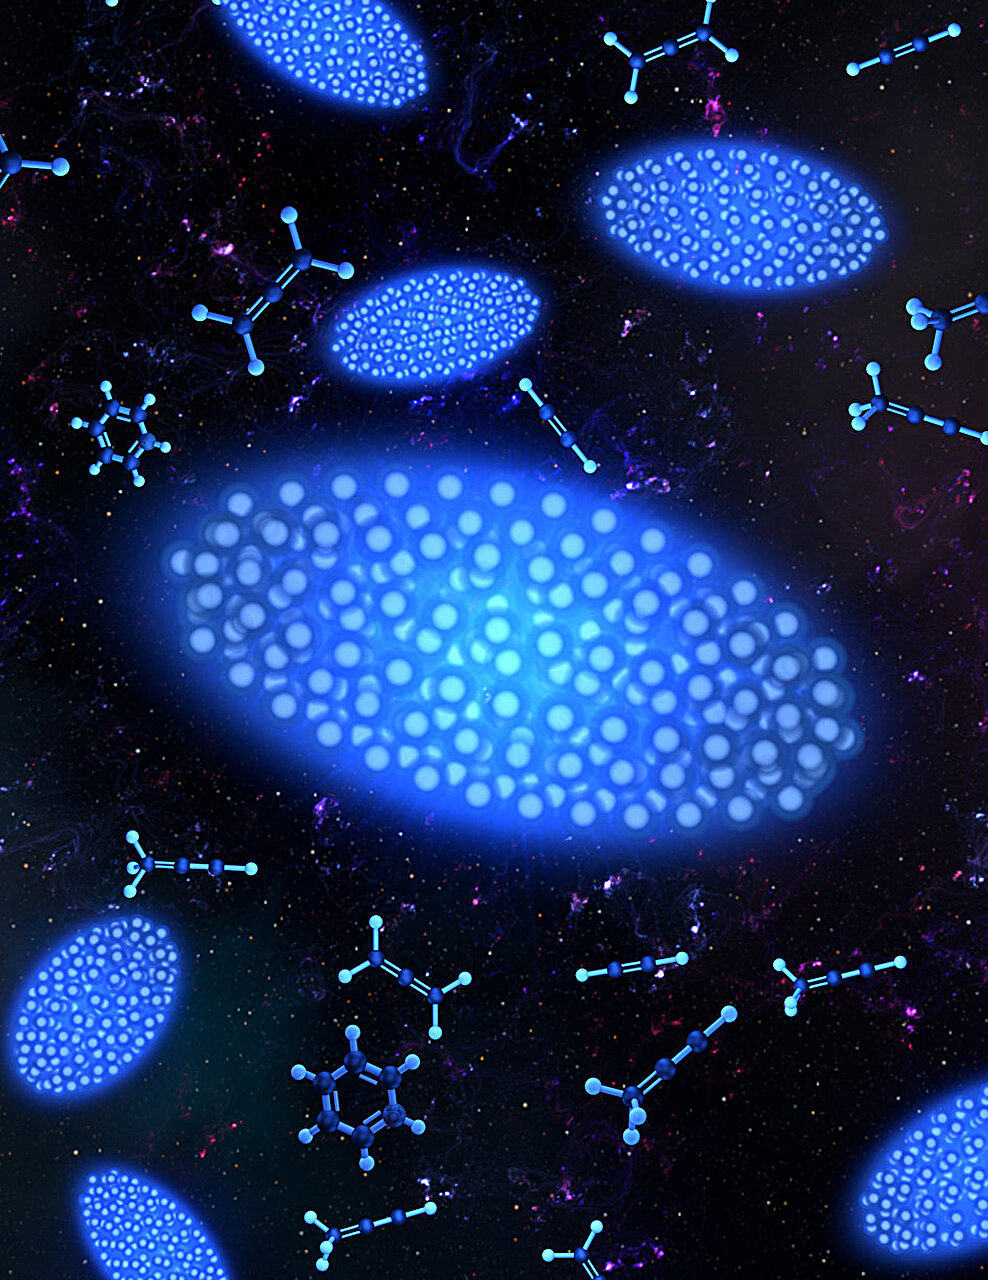 Cold Coulomb crystals, cosmic clues: Unraveling the mysteries of space chemistry